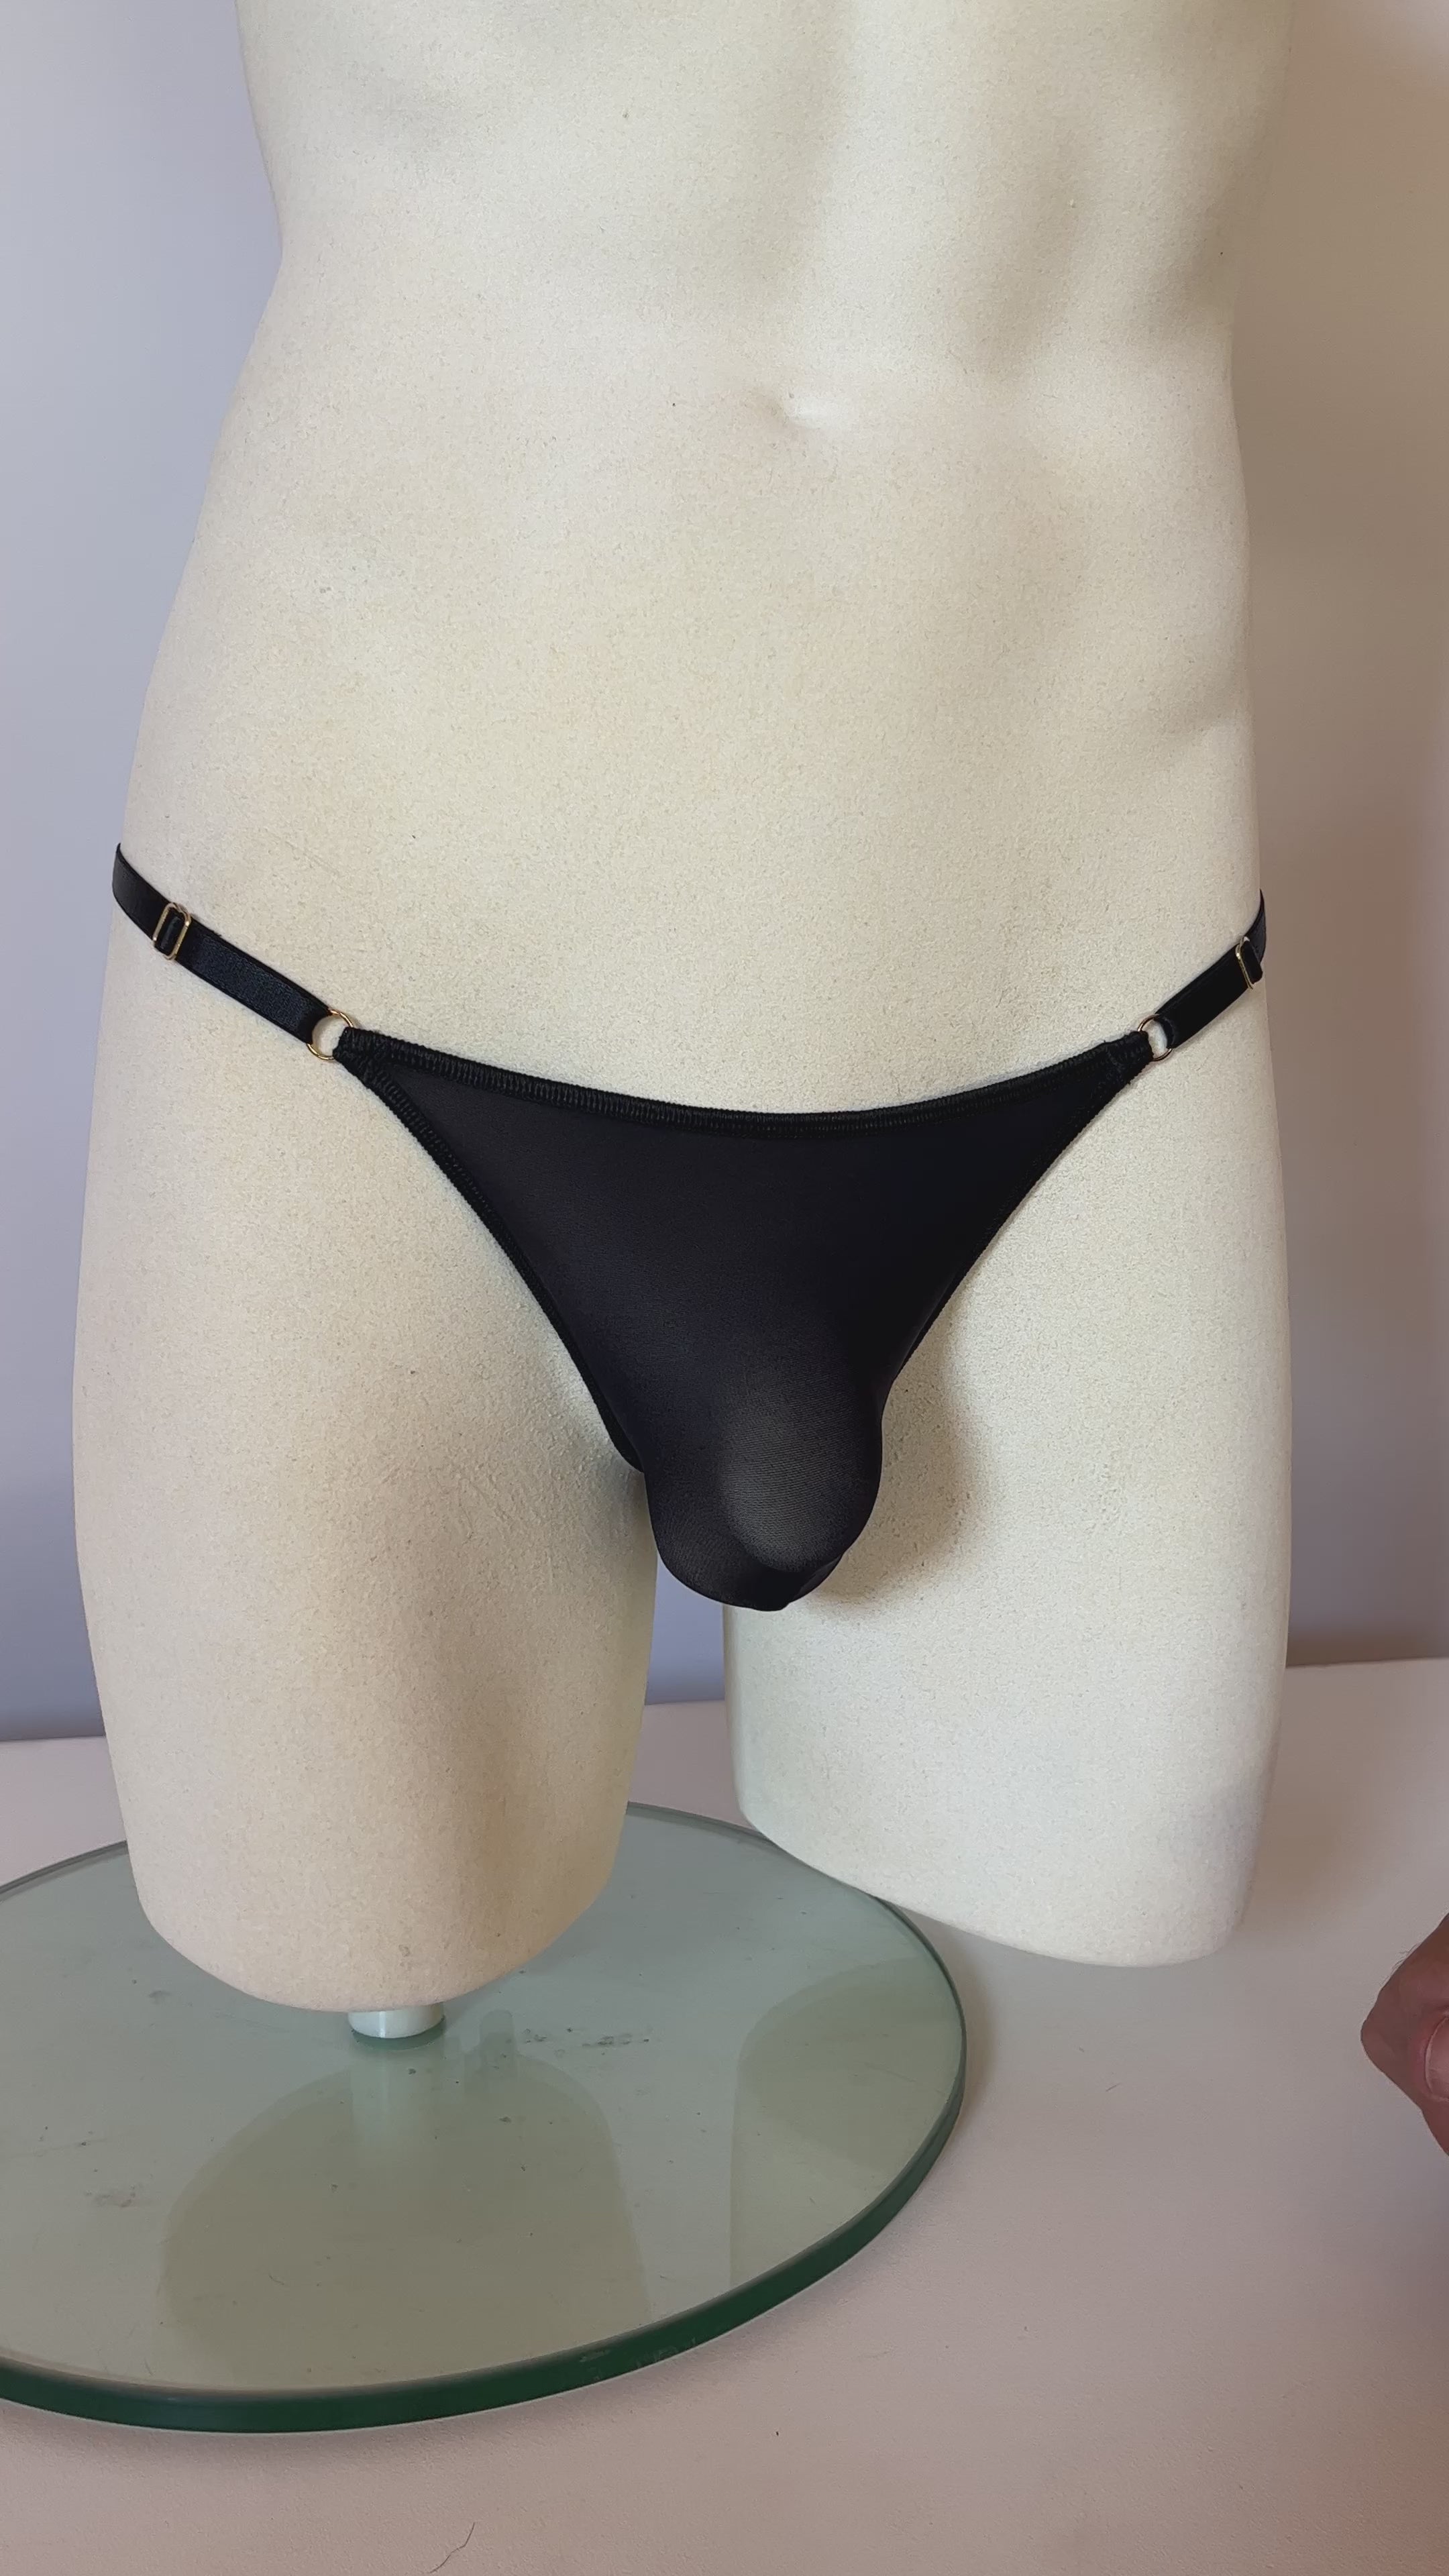 Mannequin showing the mesh tanga knickers for men, lingerie for men, mens lingerie, sexy knickers 